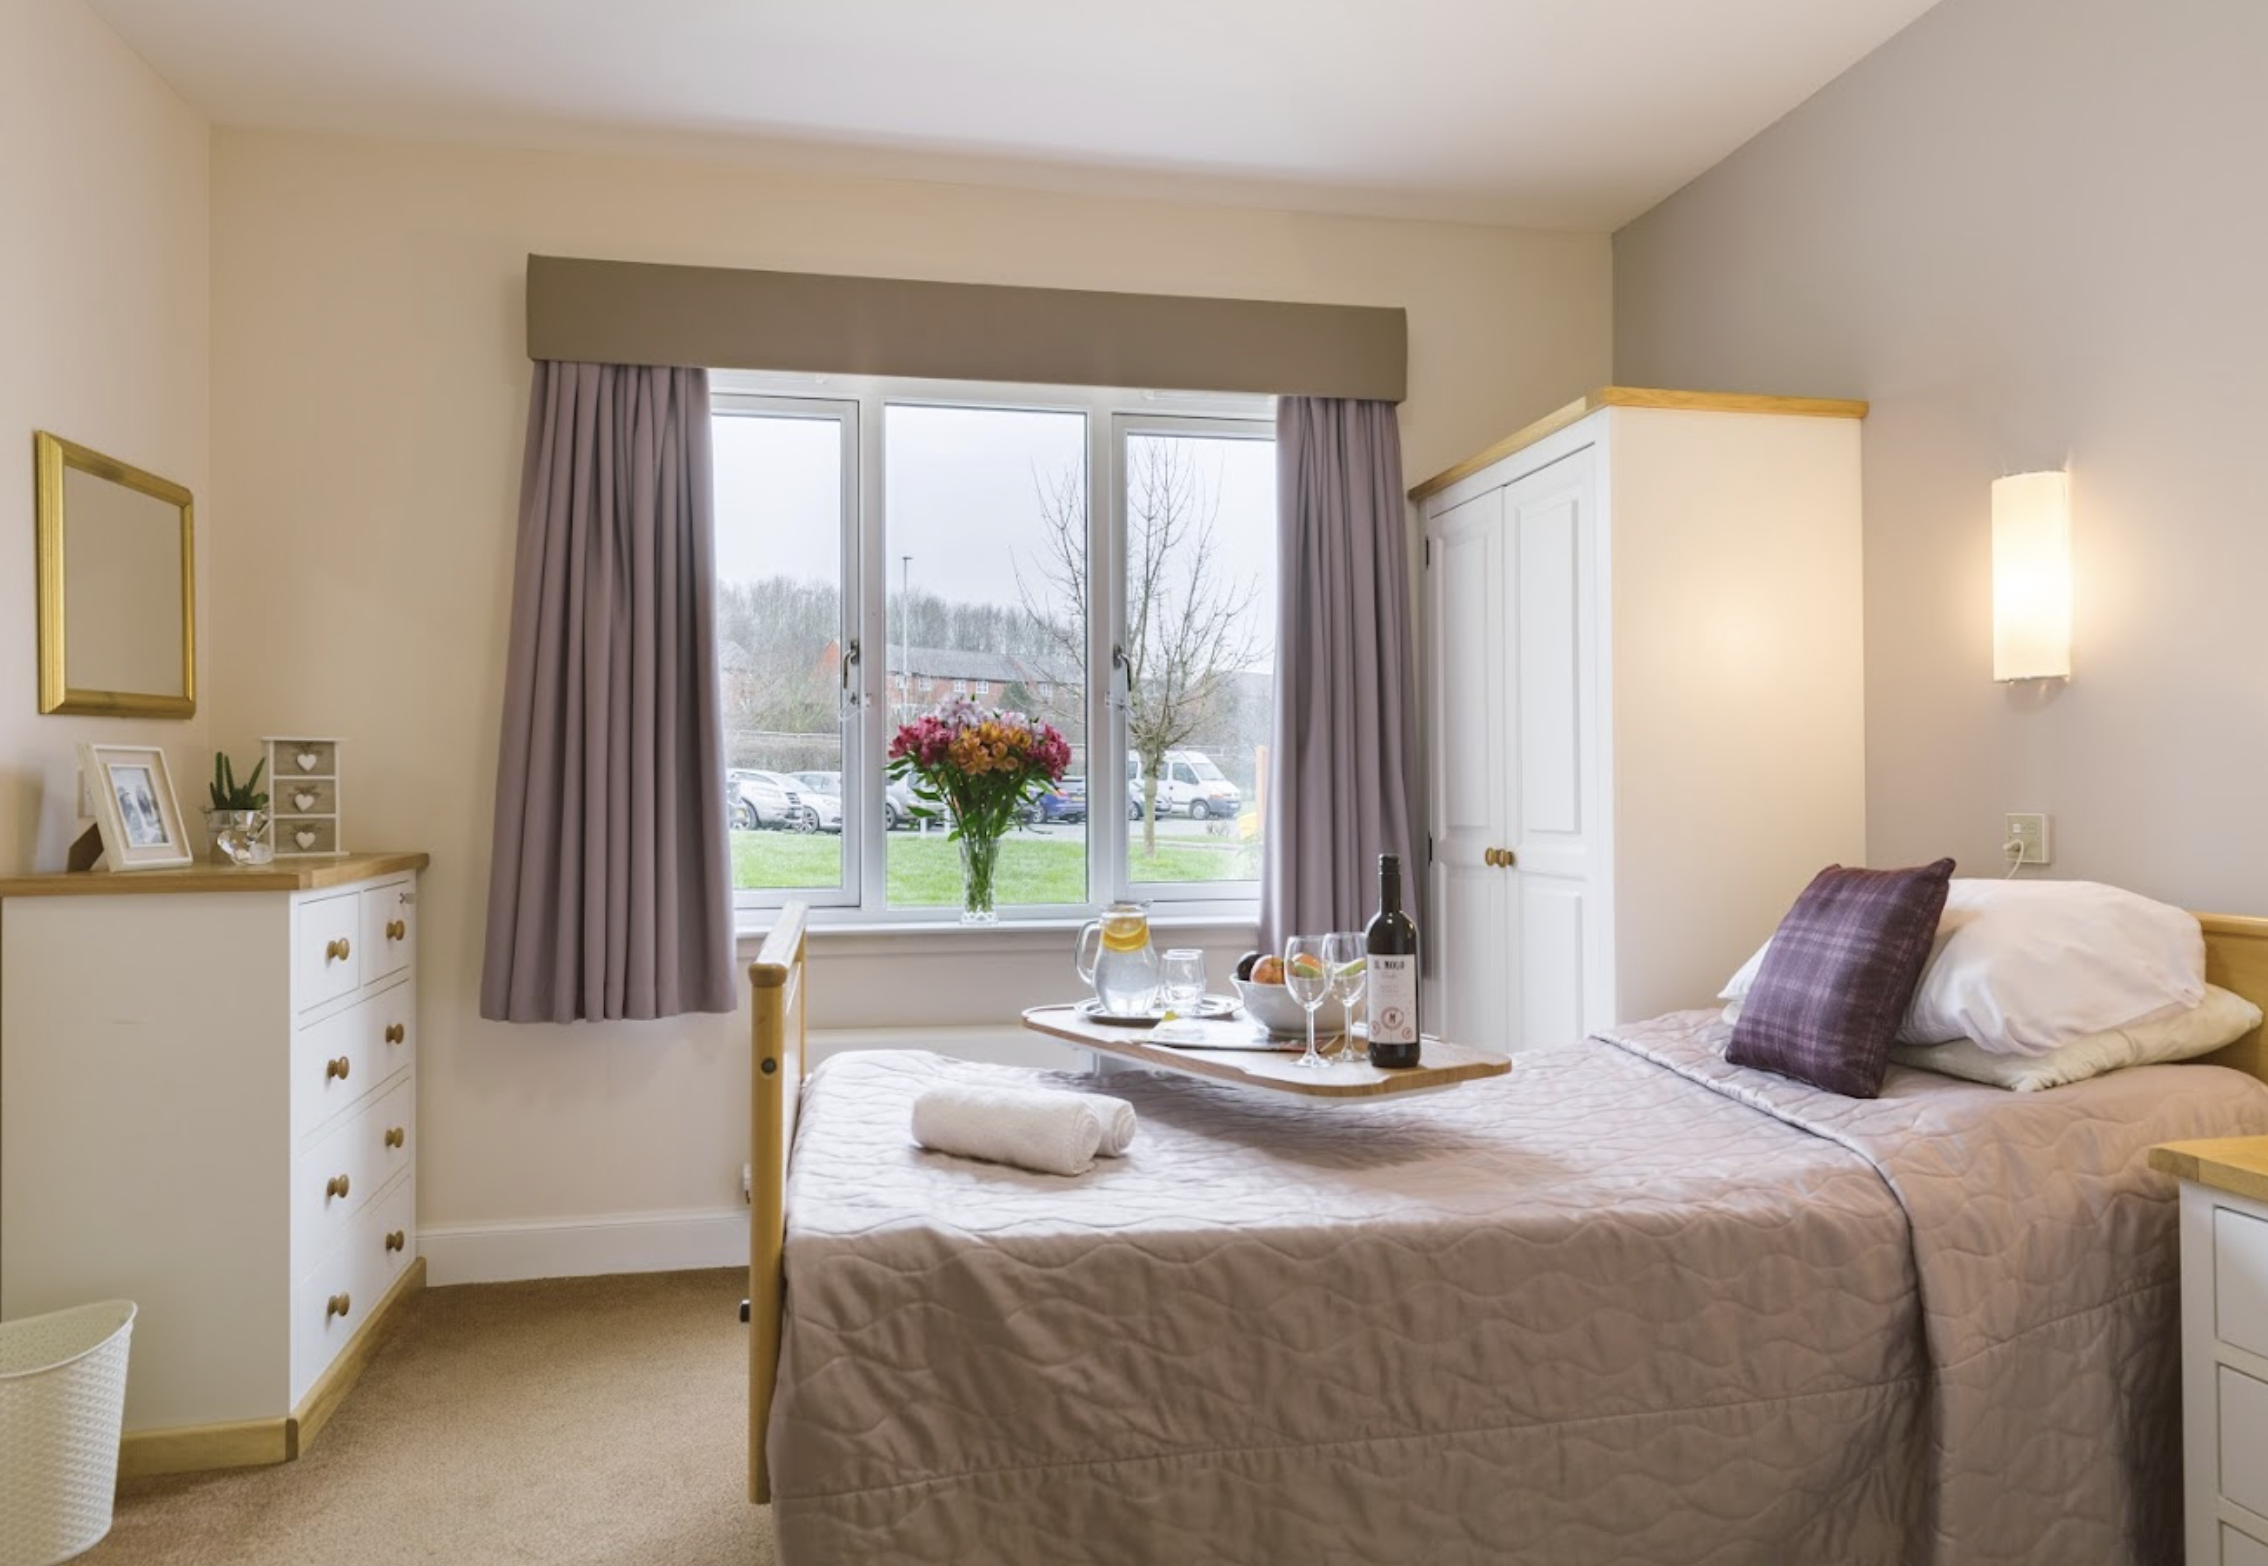 Bedroom of The Rhallt care home in Welshpool, Wales